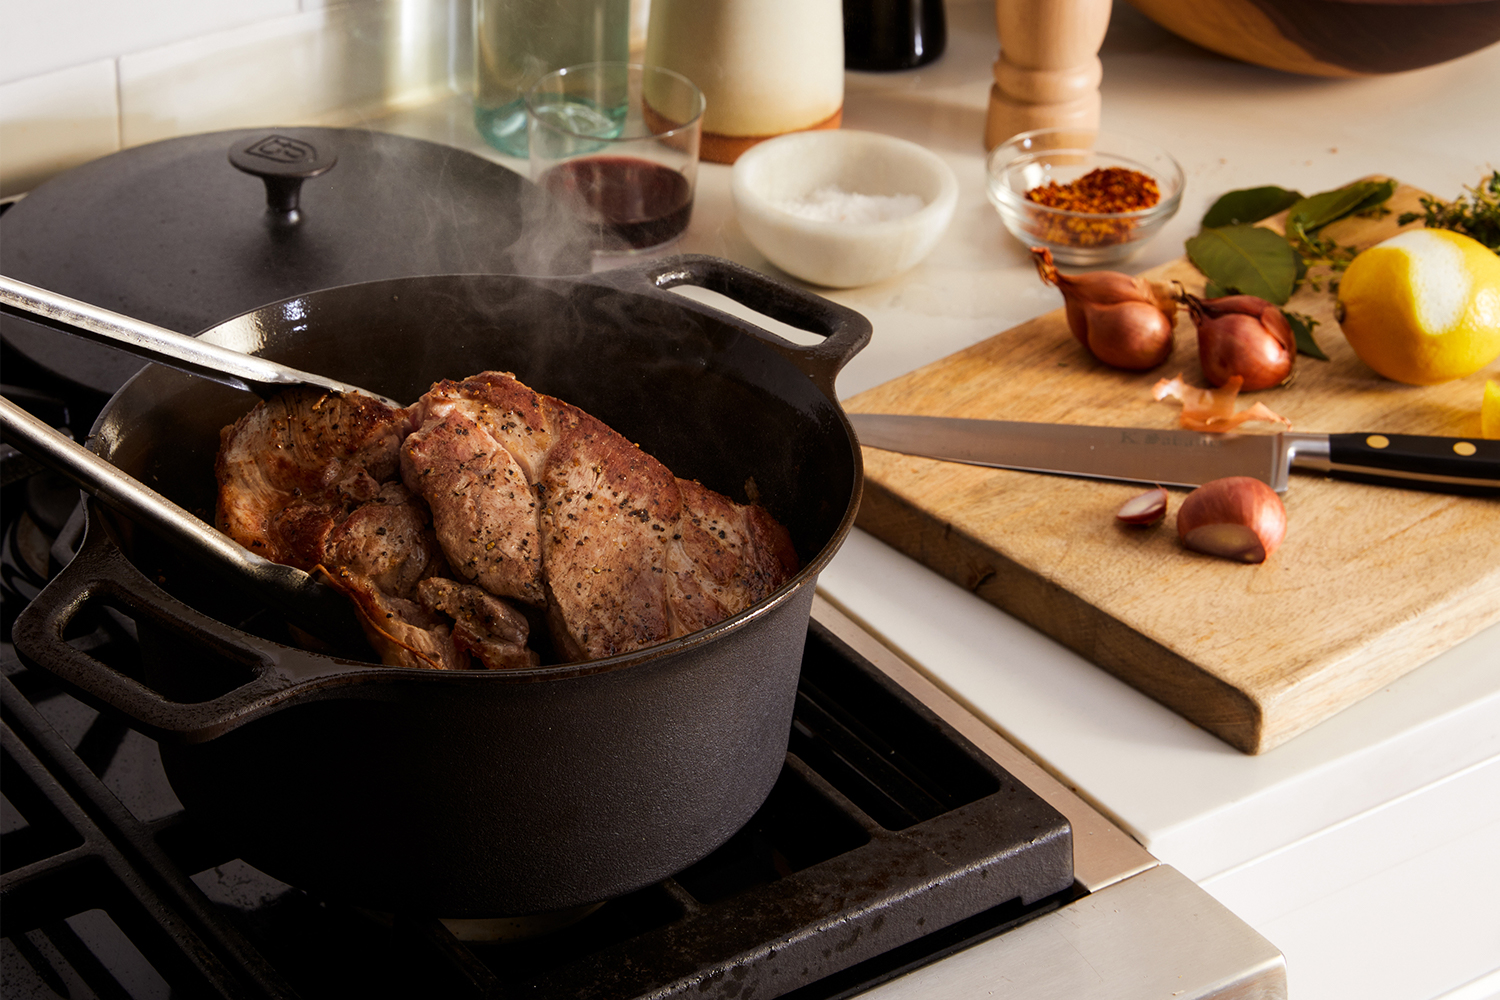 The Dutch oven from Field Company sitting on the stove. The bare cast iron pot is on sale during the brand's factory seconds sale.